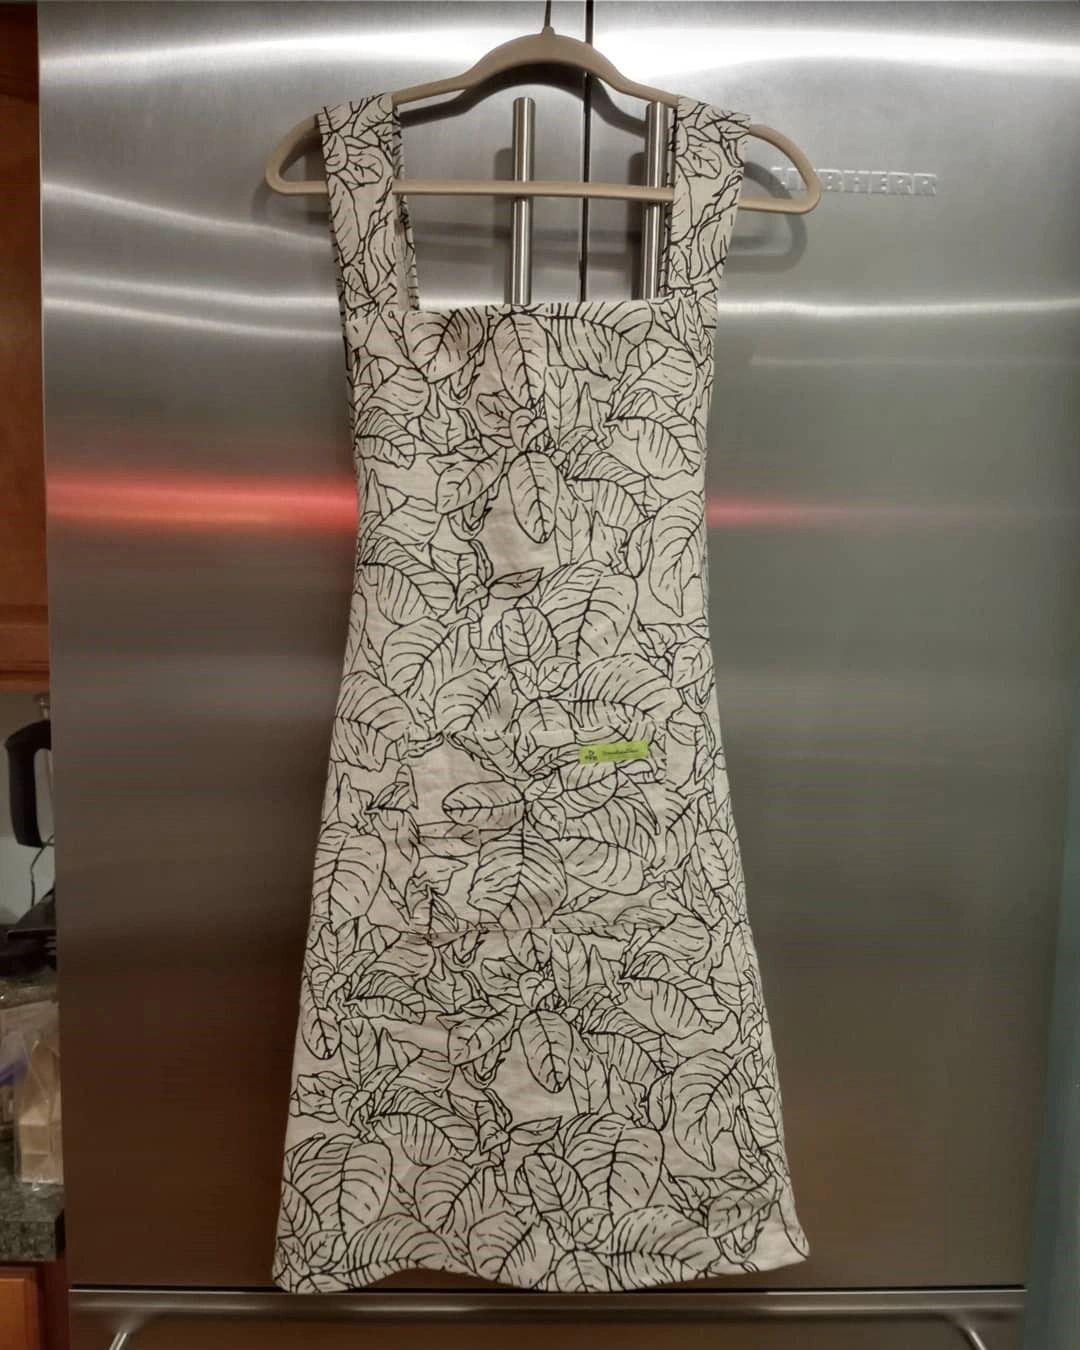 Cross back apron in linen flower print fabric hanging on the refrigerator.